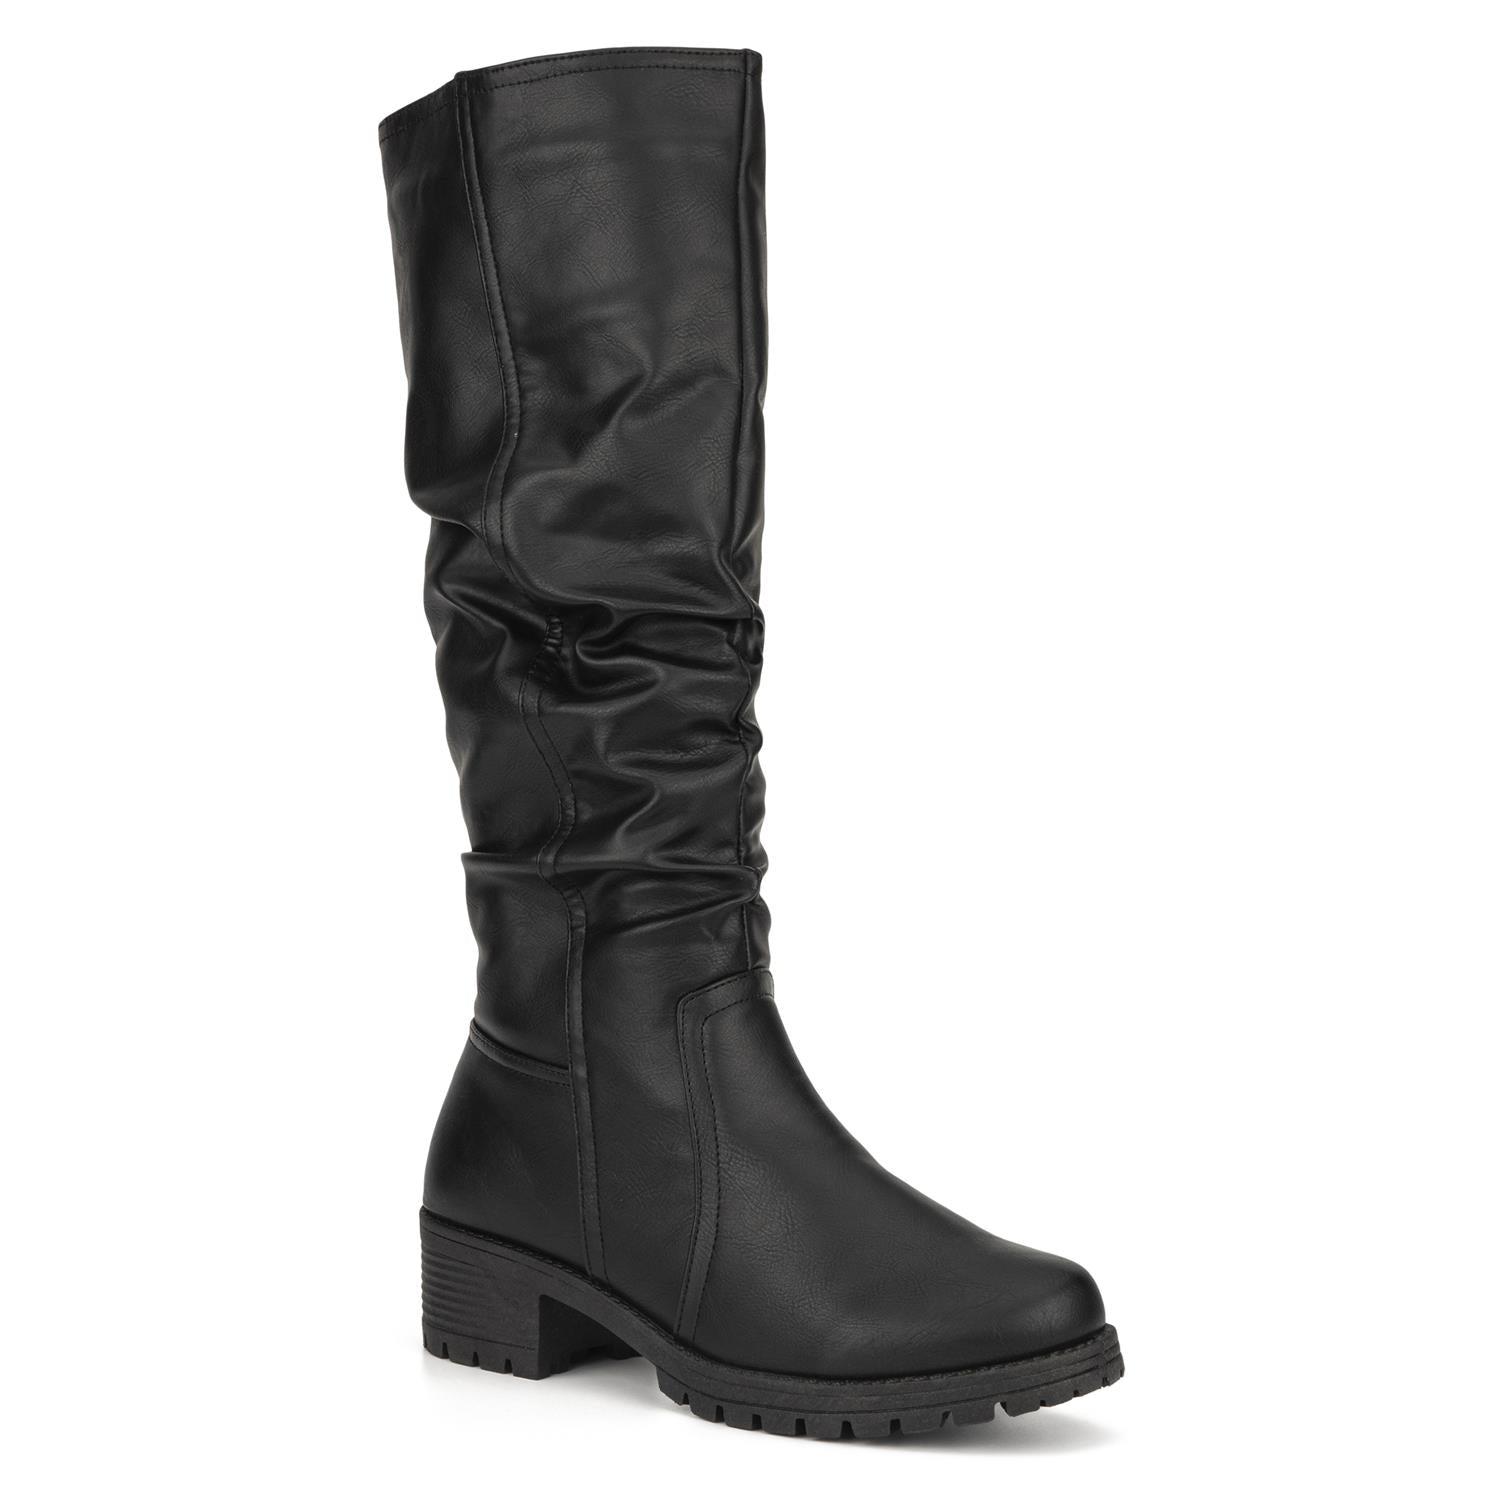 Olivia Miller Amber Tall Boot in Black | Lyst